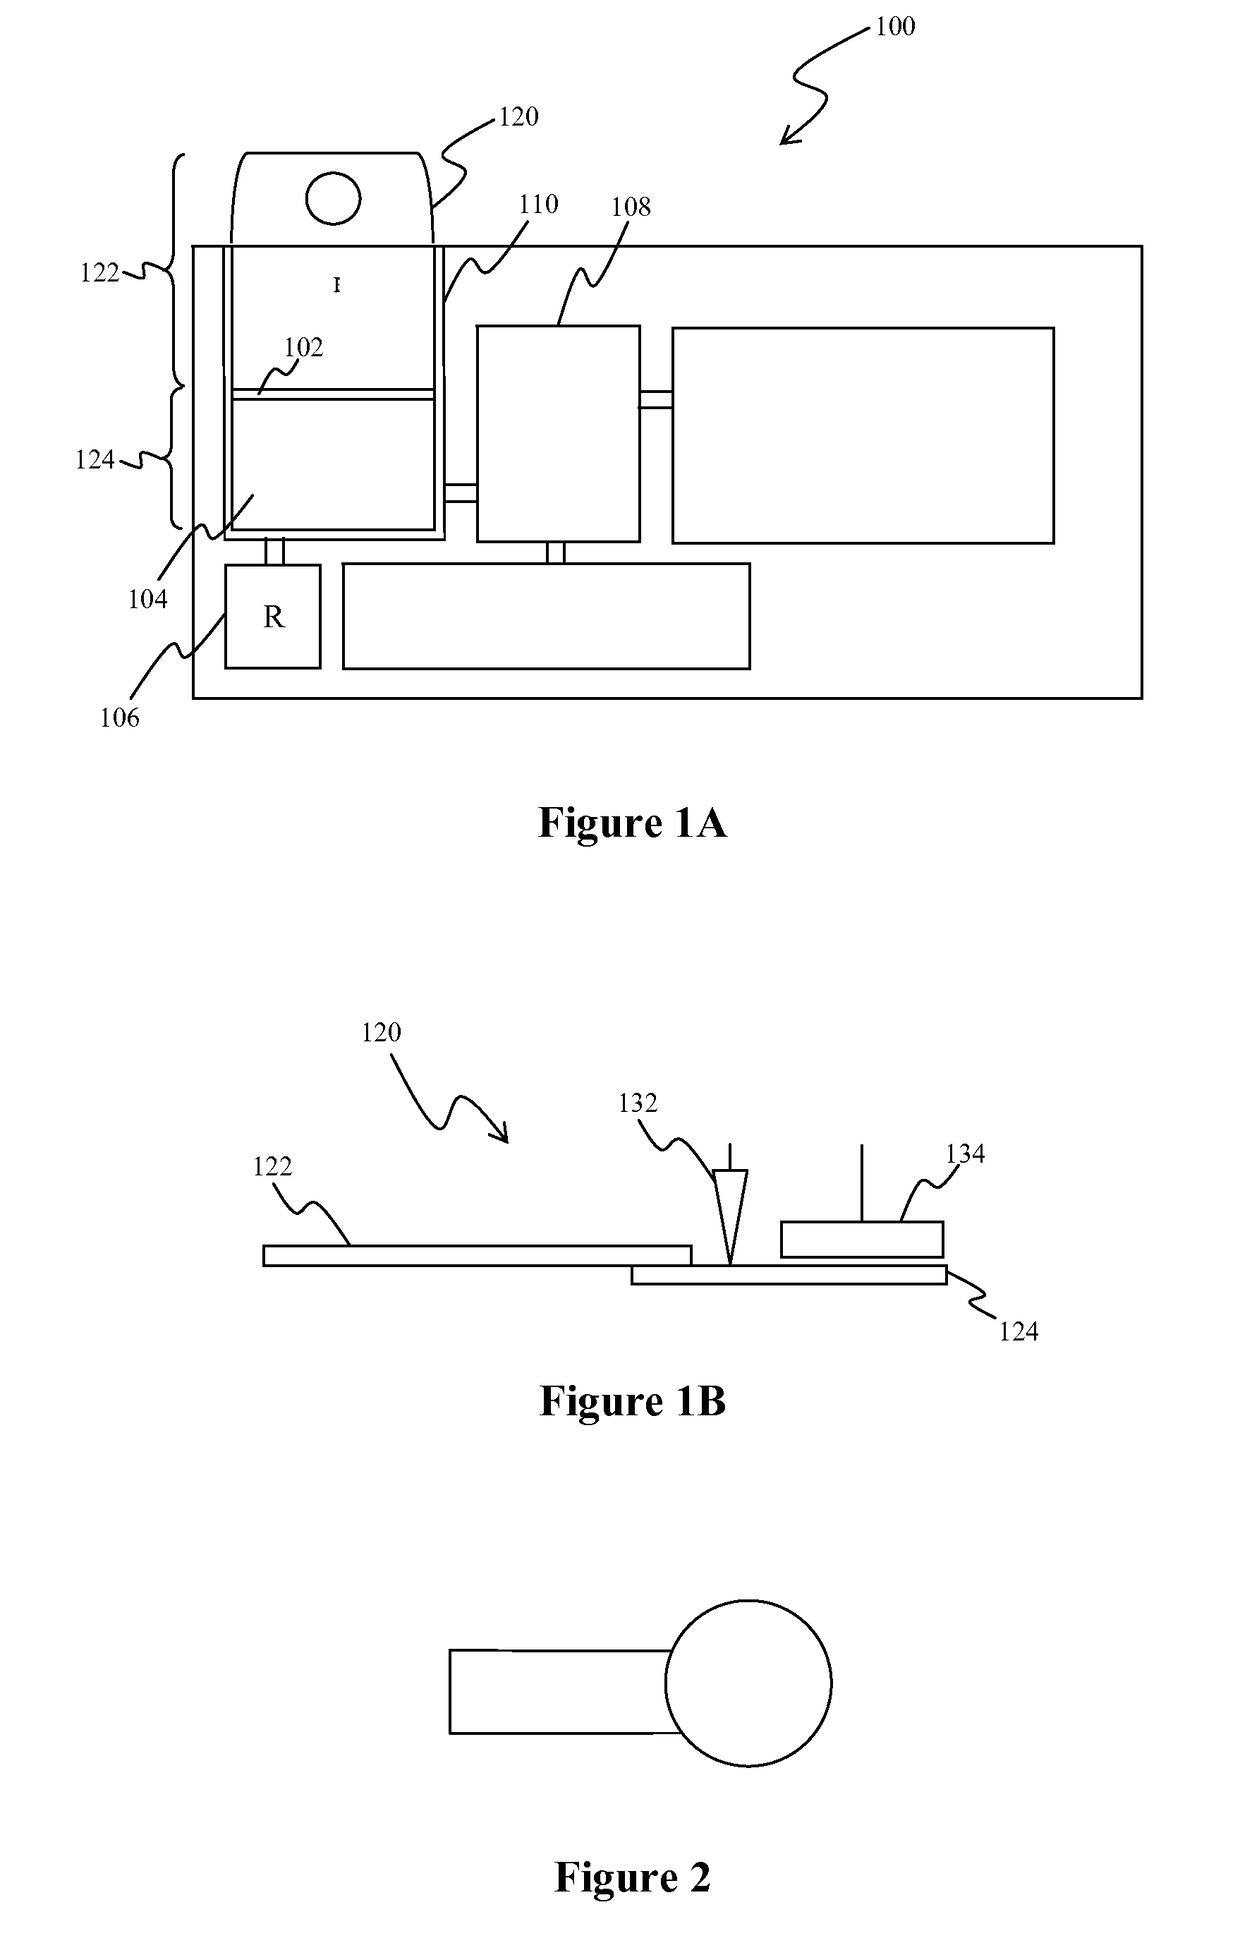 Whole blood analytic device and method therefor